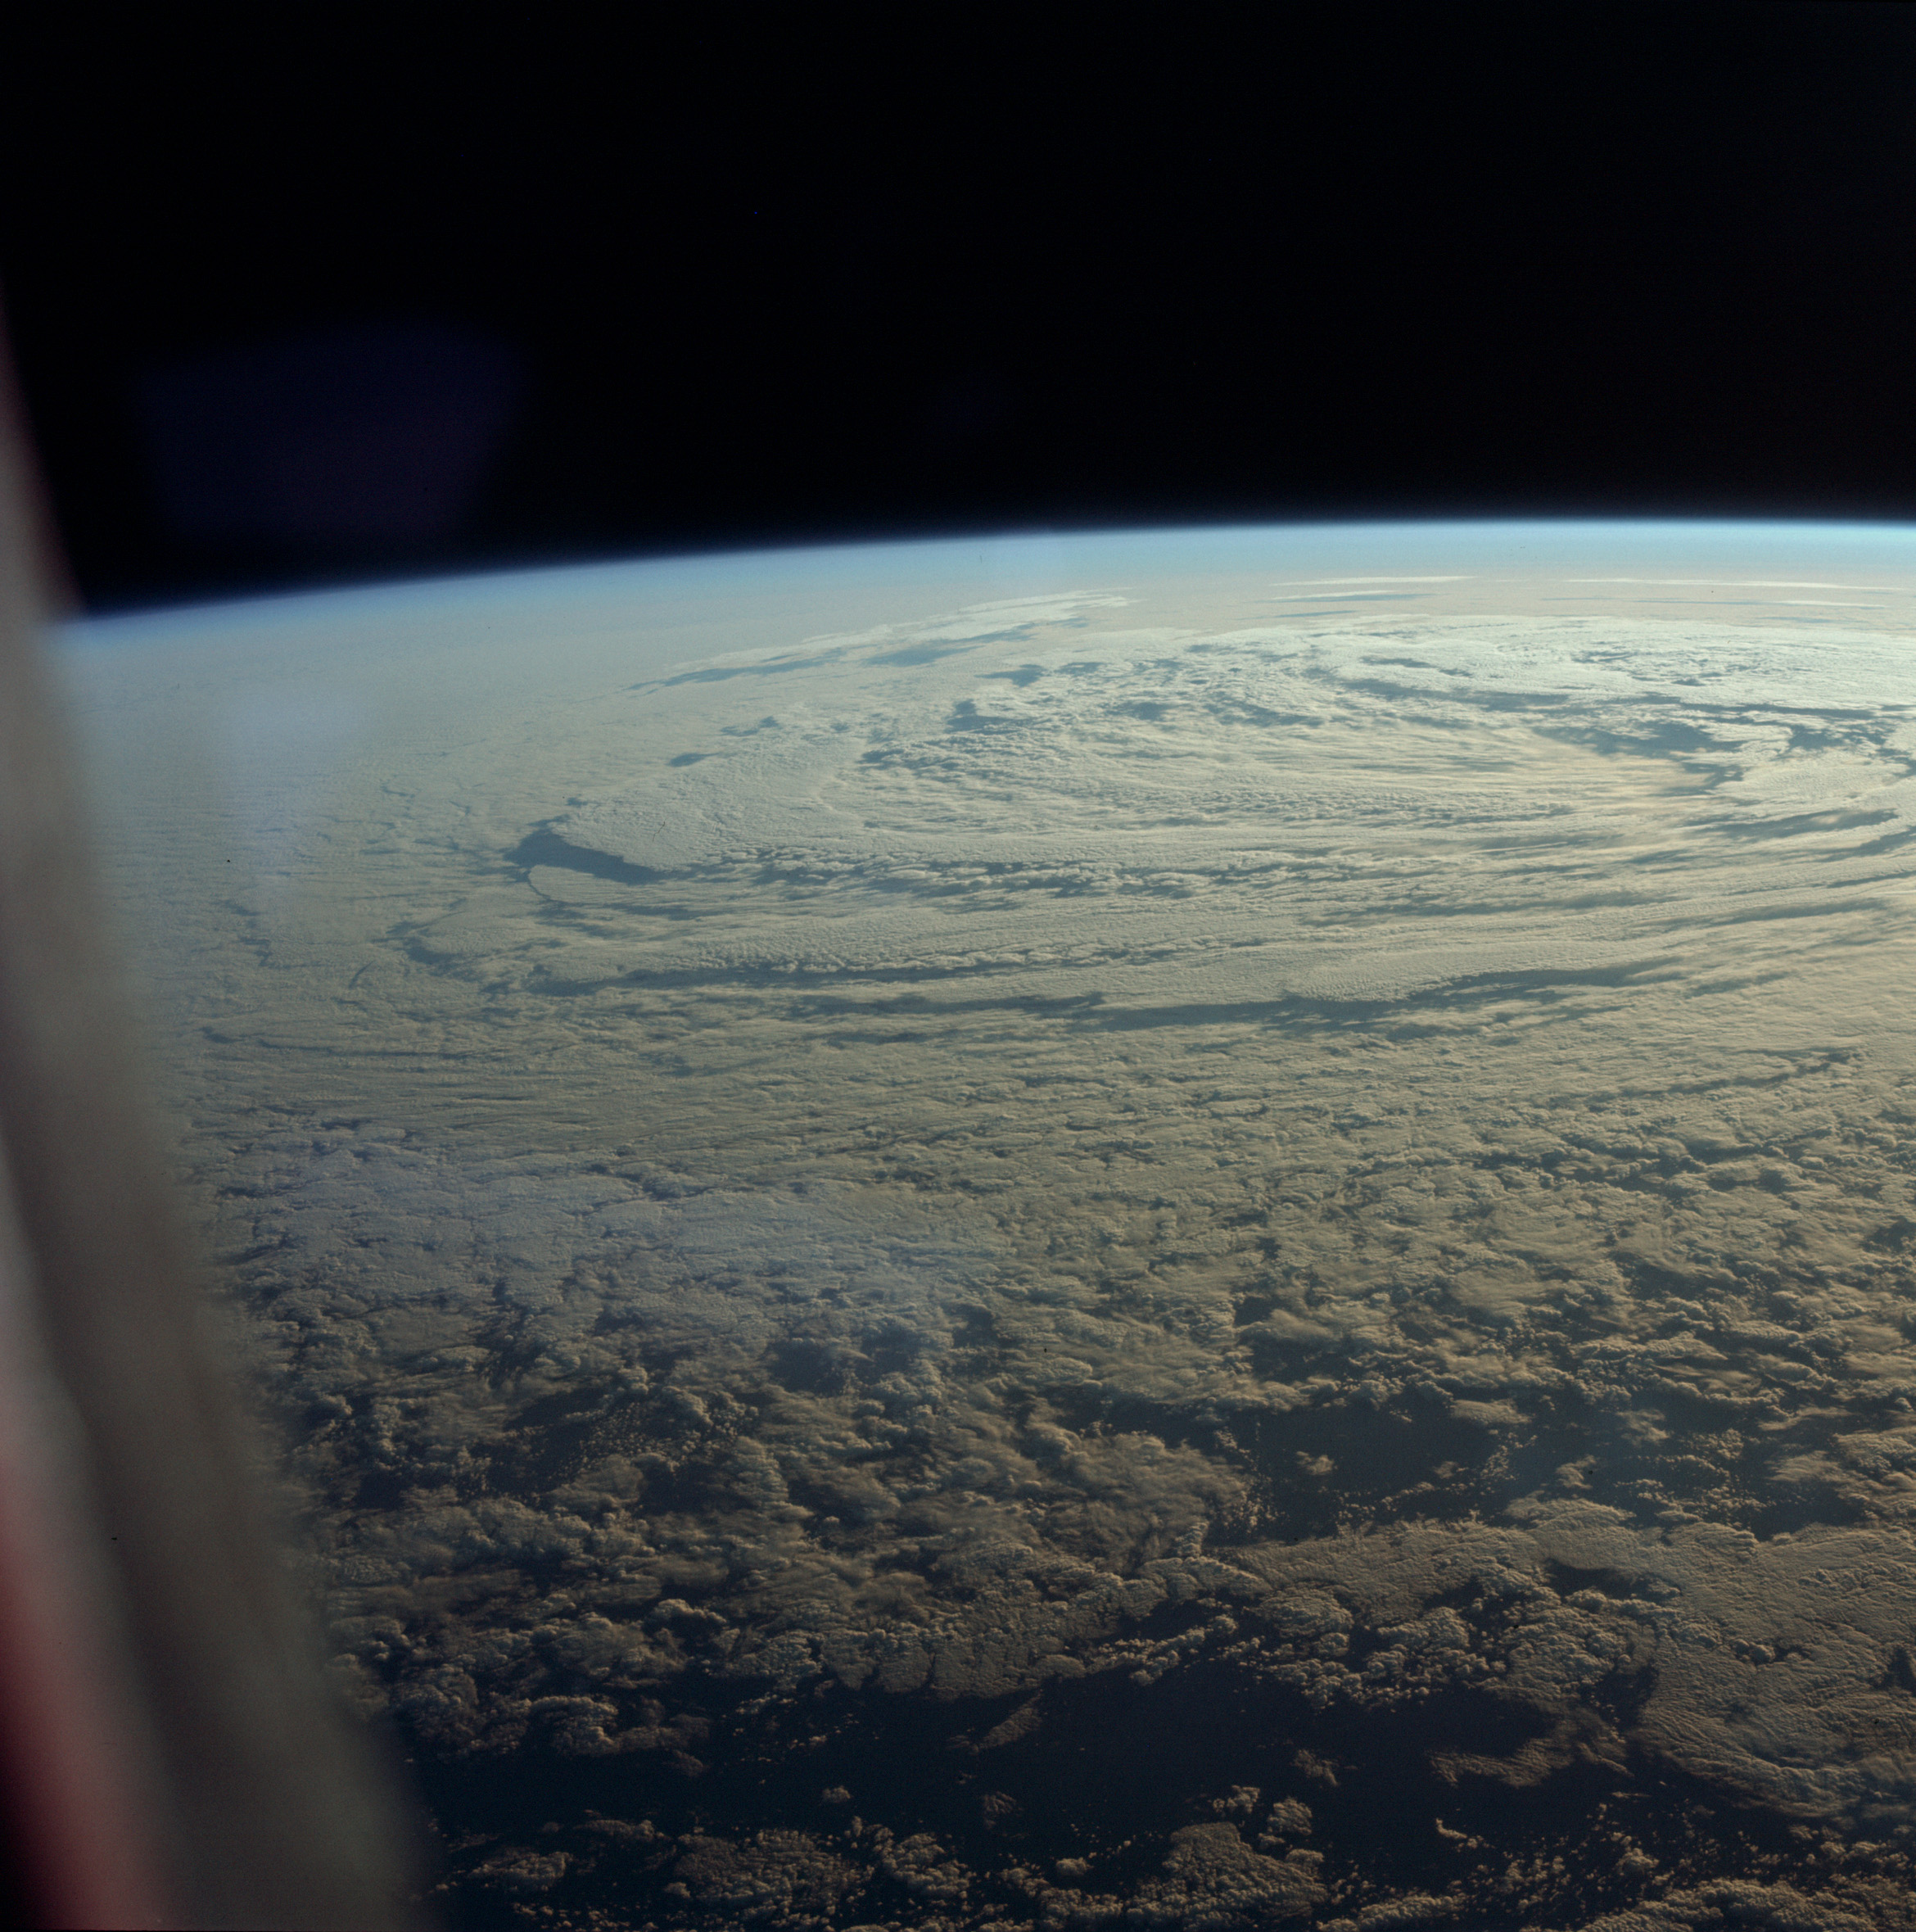 A view to the Earth atmosphere pictured by the Apollo 11 astronauts while orbiting the planet on July 16, 1969.